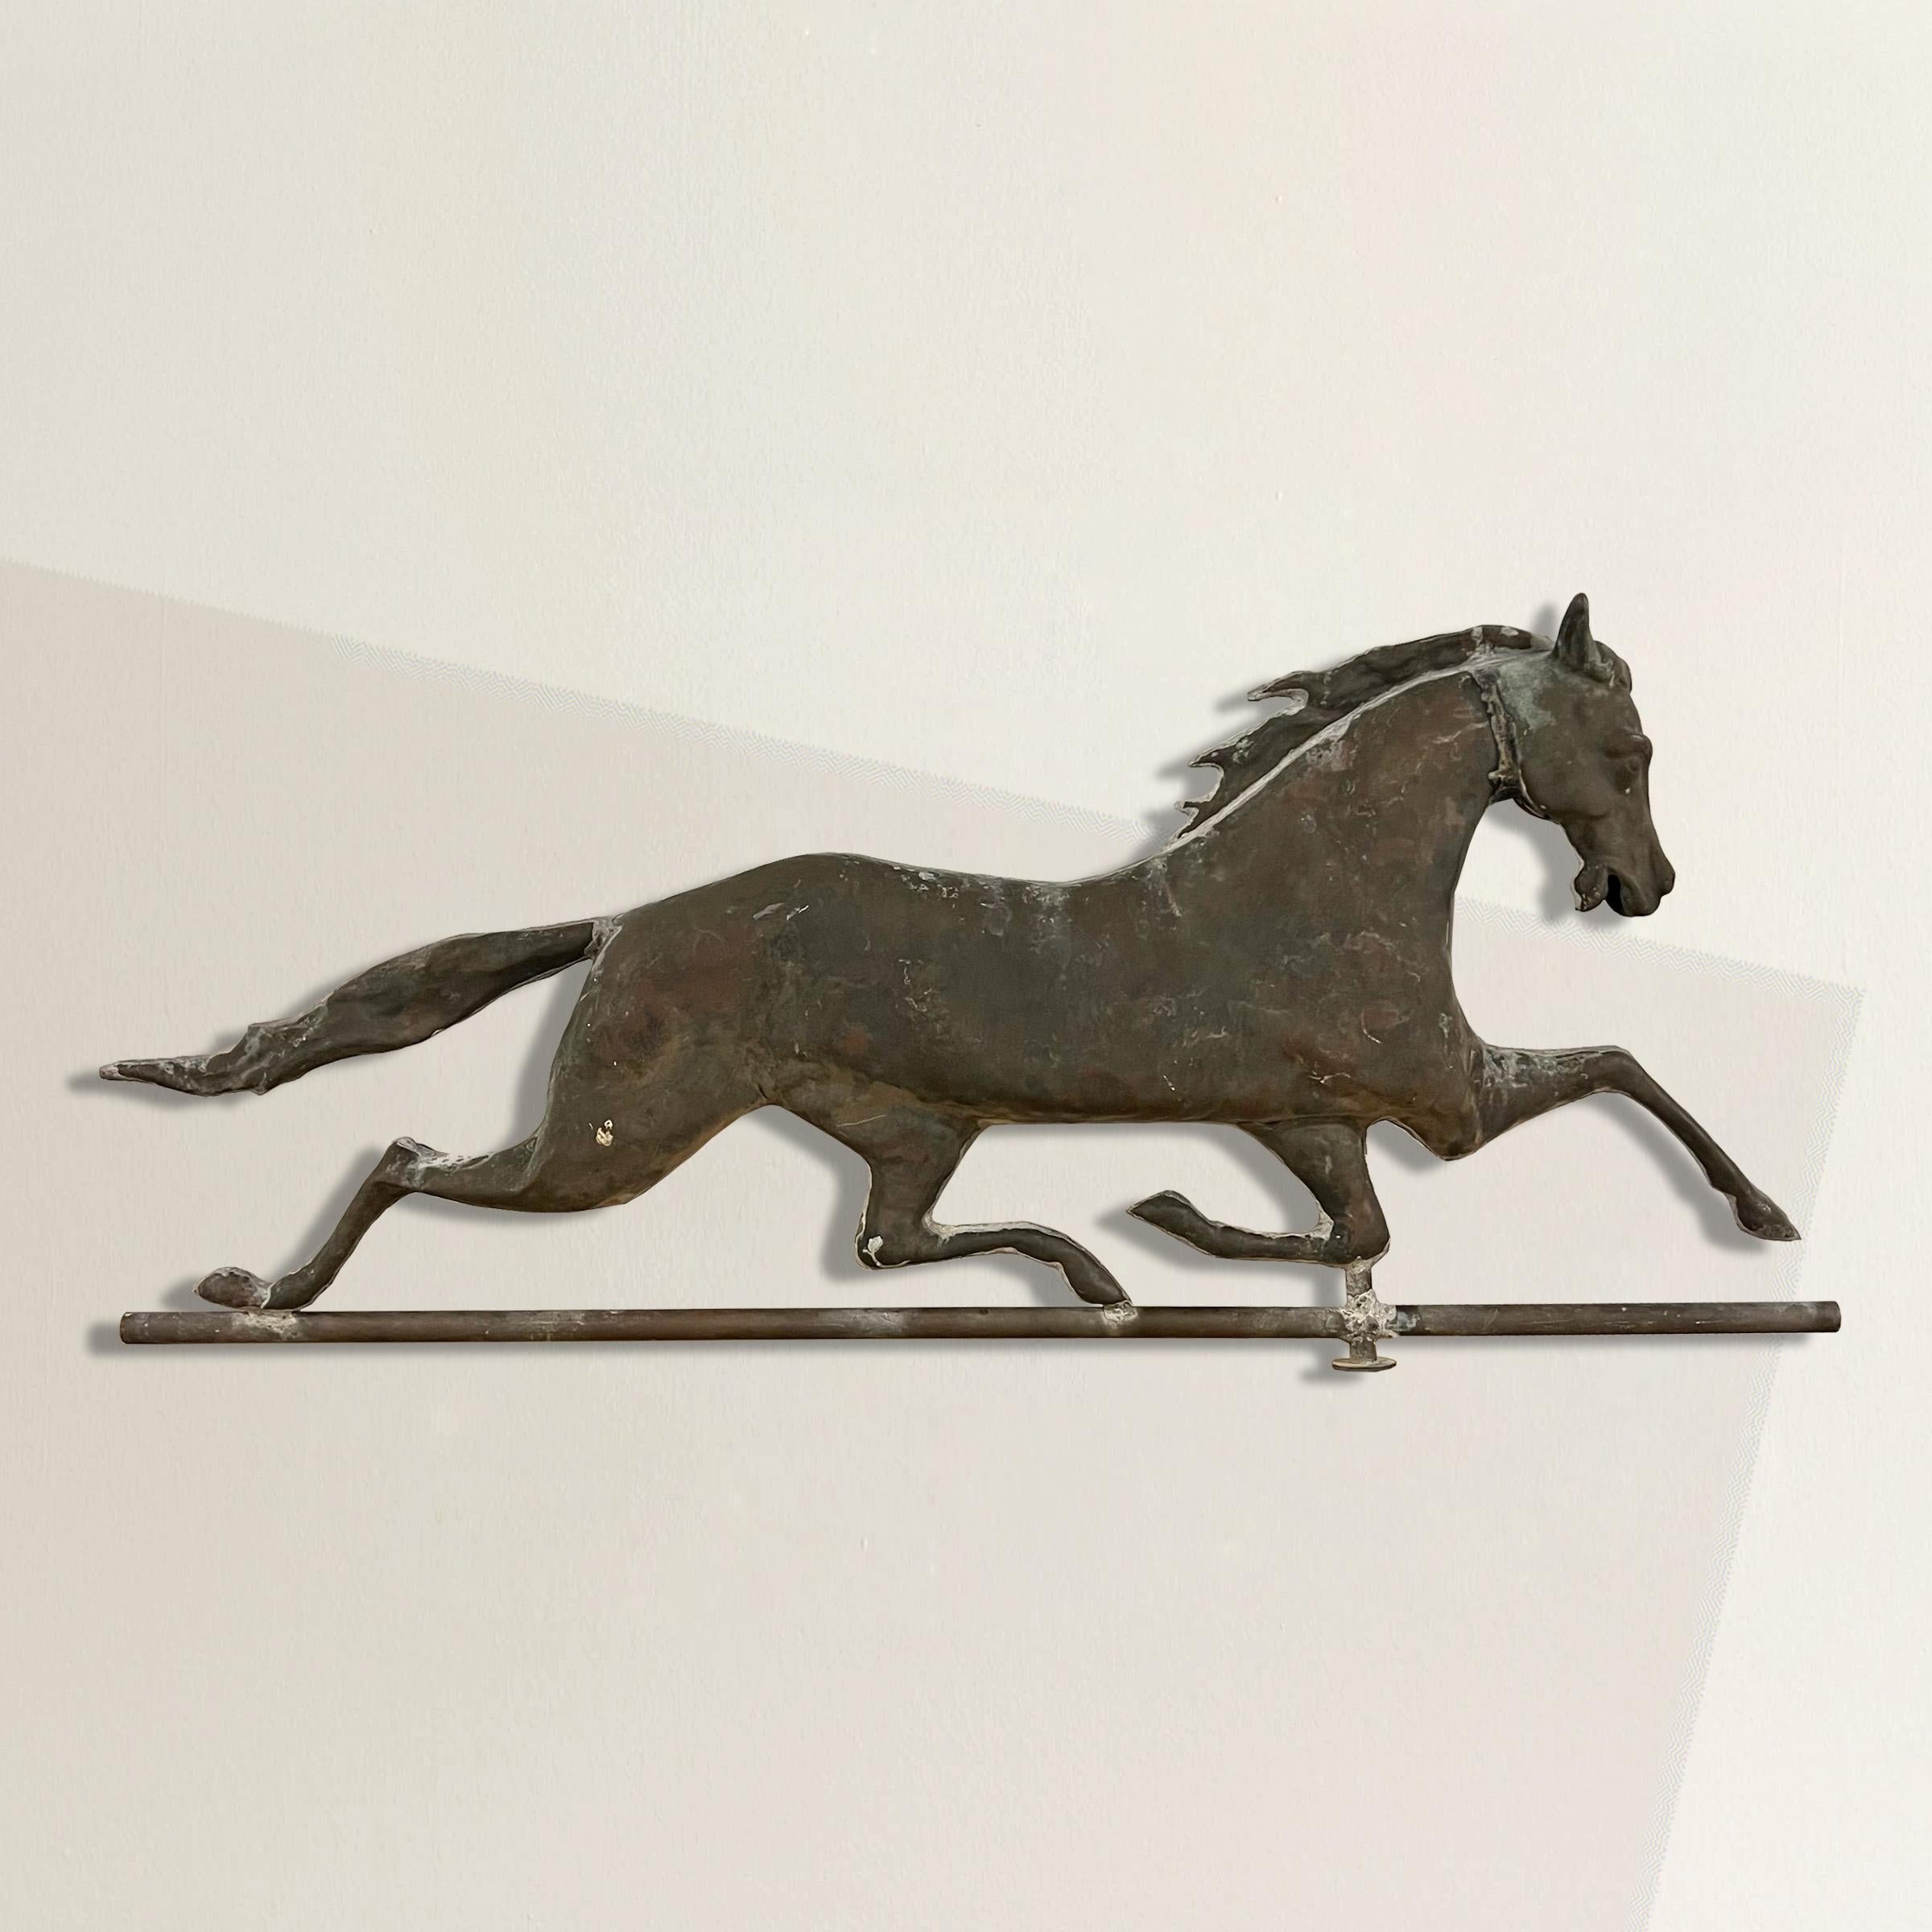 Behold the magnificence of this rare and exceptional 19th century American full-bodied Patchen horse weathervane by E. G. Washburne & Co. Crafted with meticulous attention to detail, this weathervane showcases the remarkable artistry and ingenuity